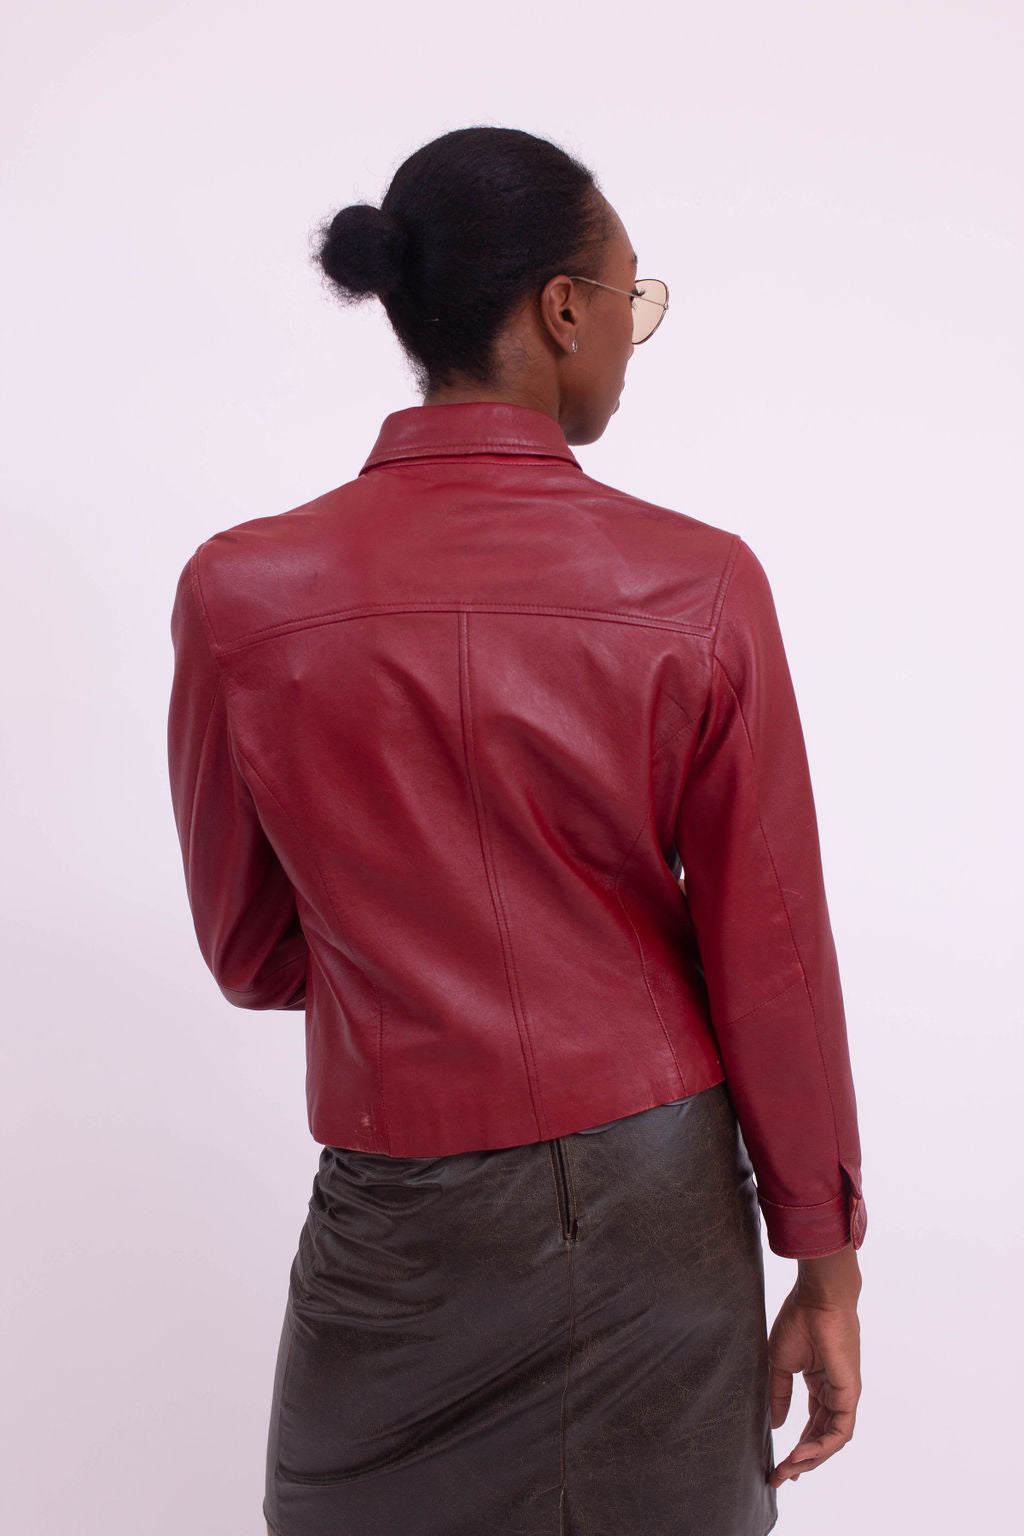 Cherry Red Leather Jacket